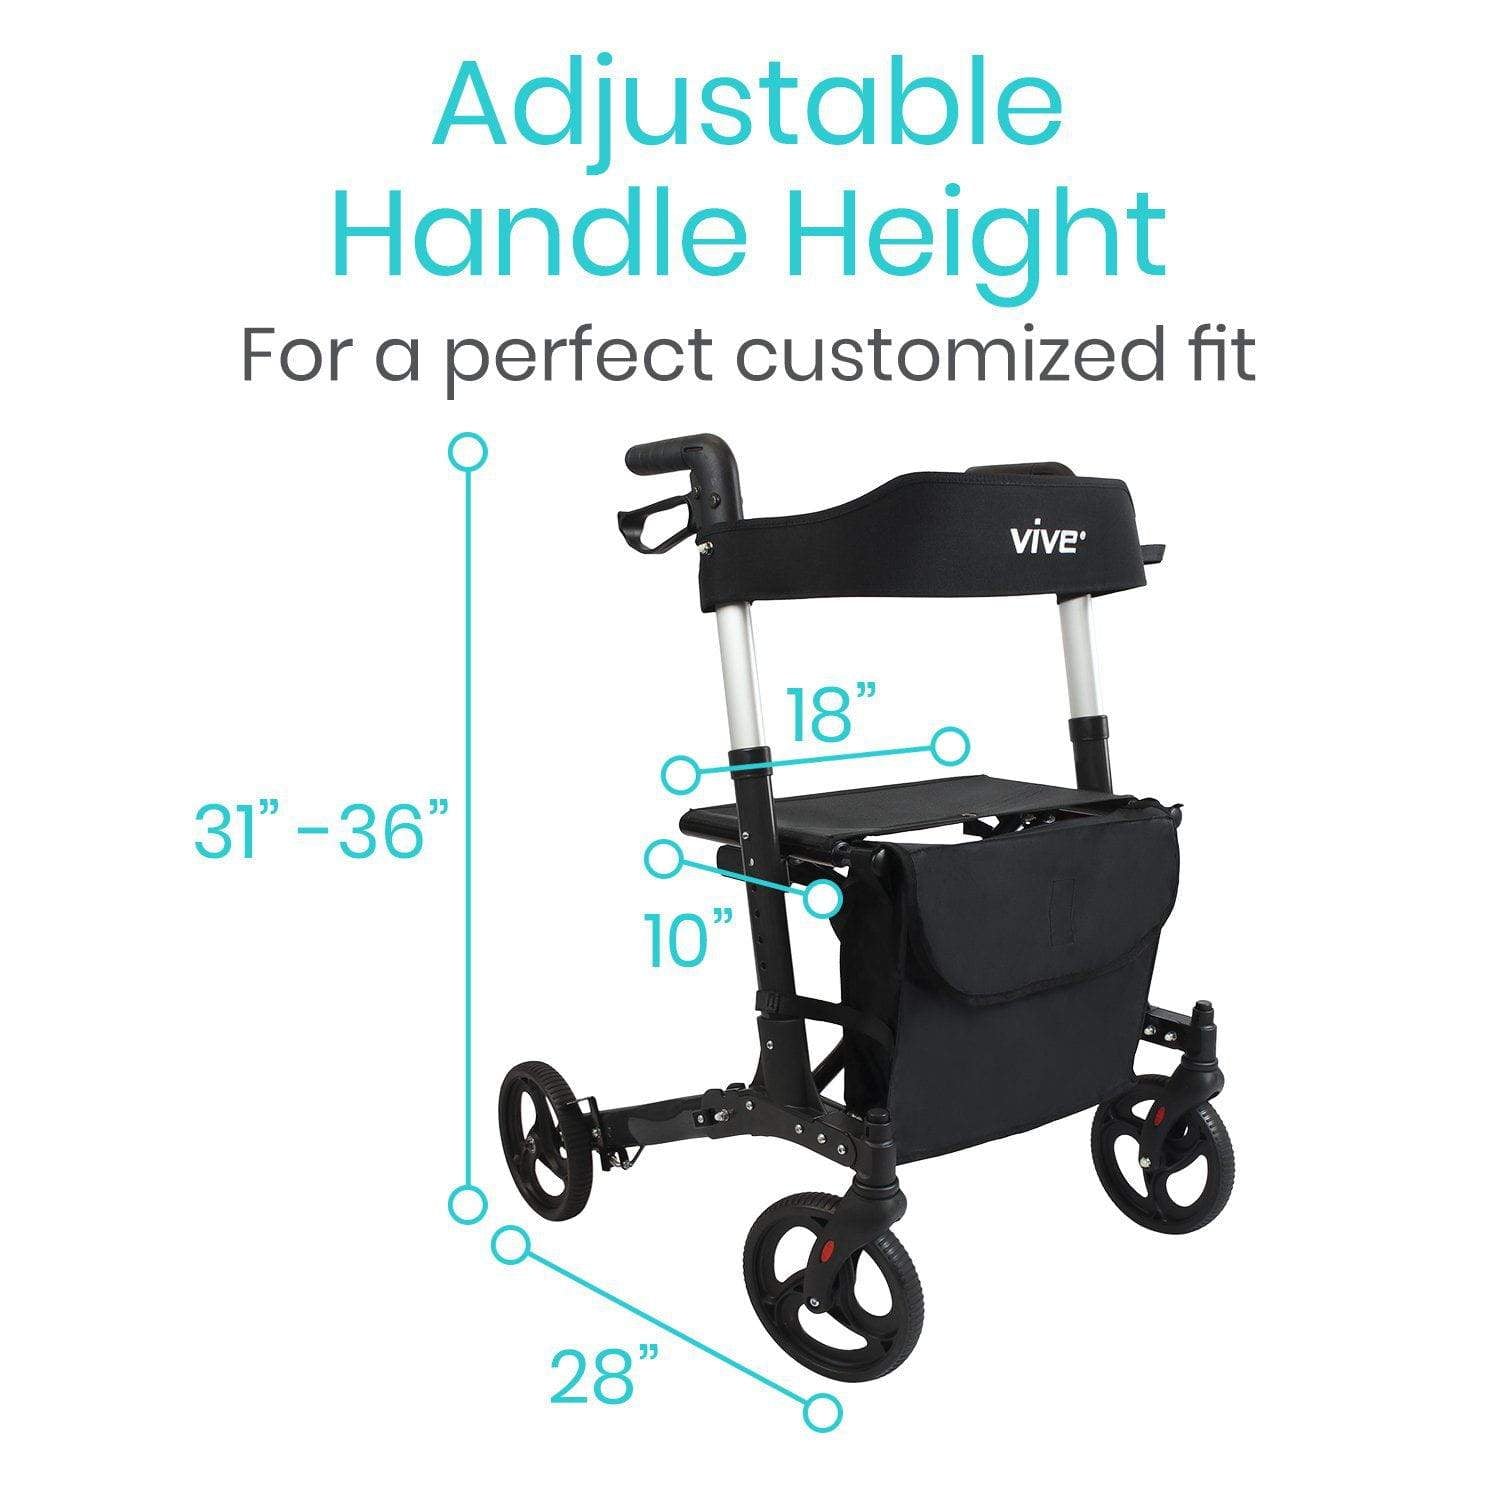 Big wheel rollator from Vive with dimensions